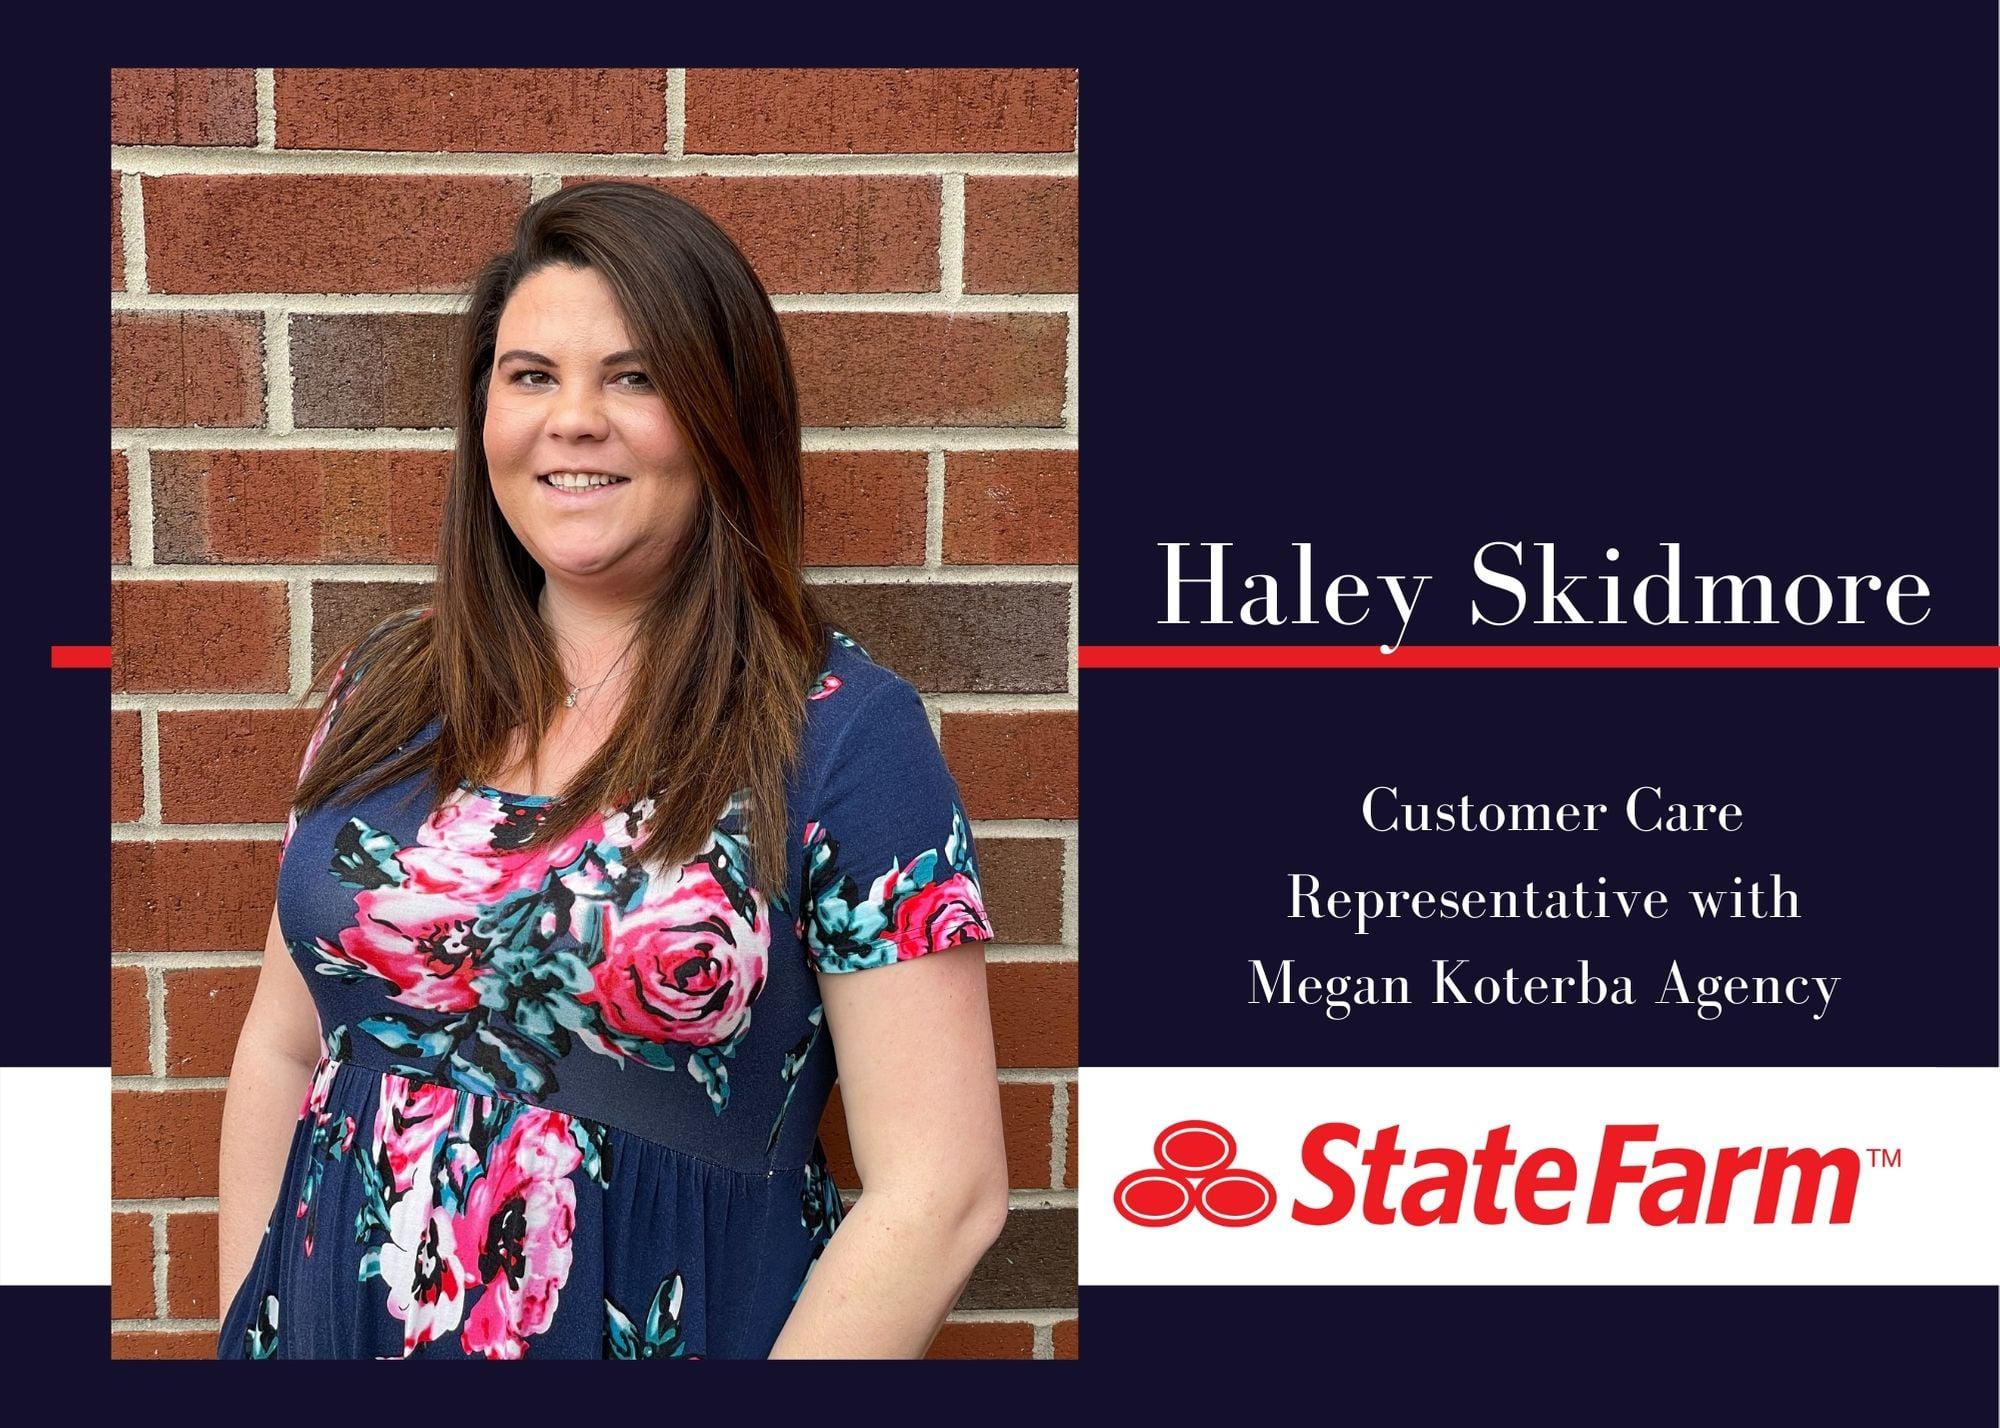 We are happy to introduce the newest member of our team, Haley! Haley is excited to be joining our service department!